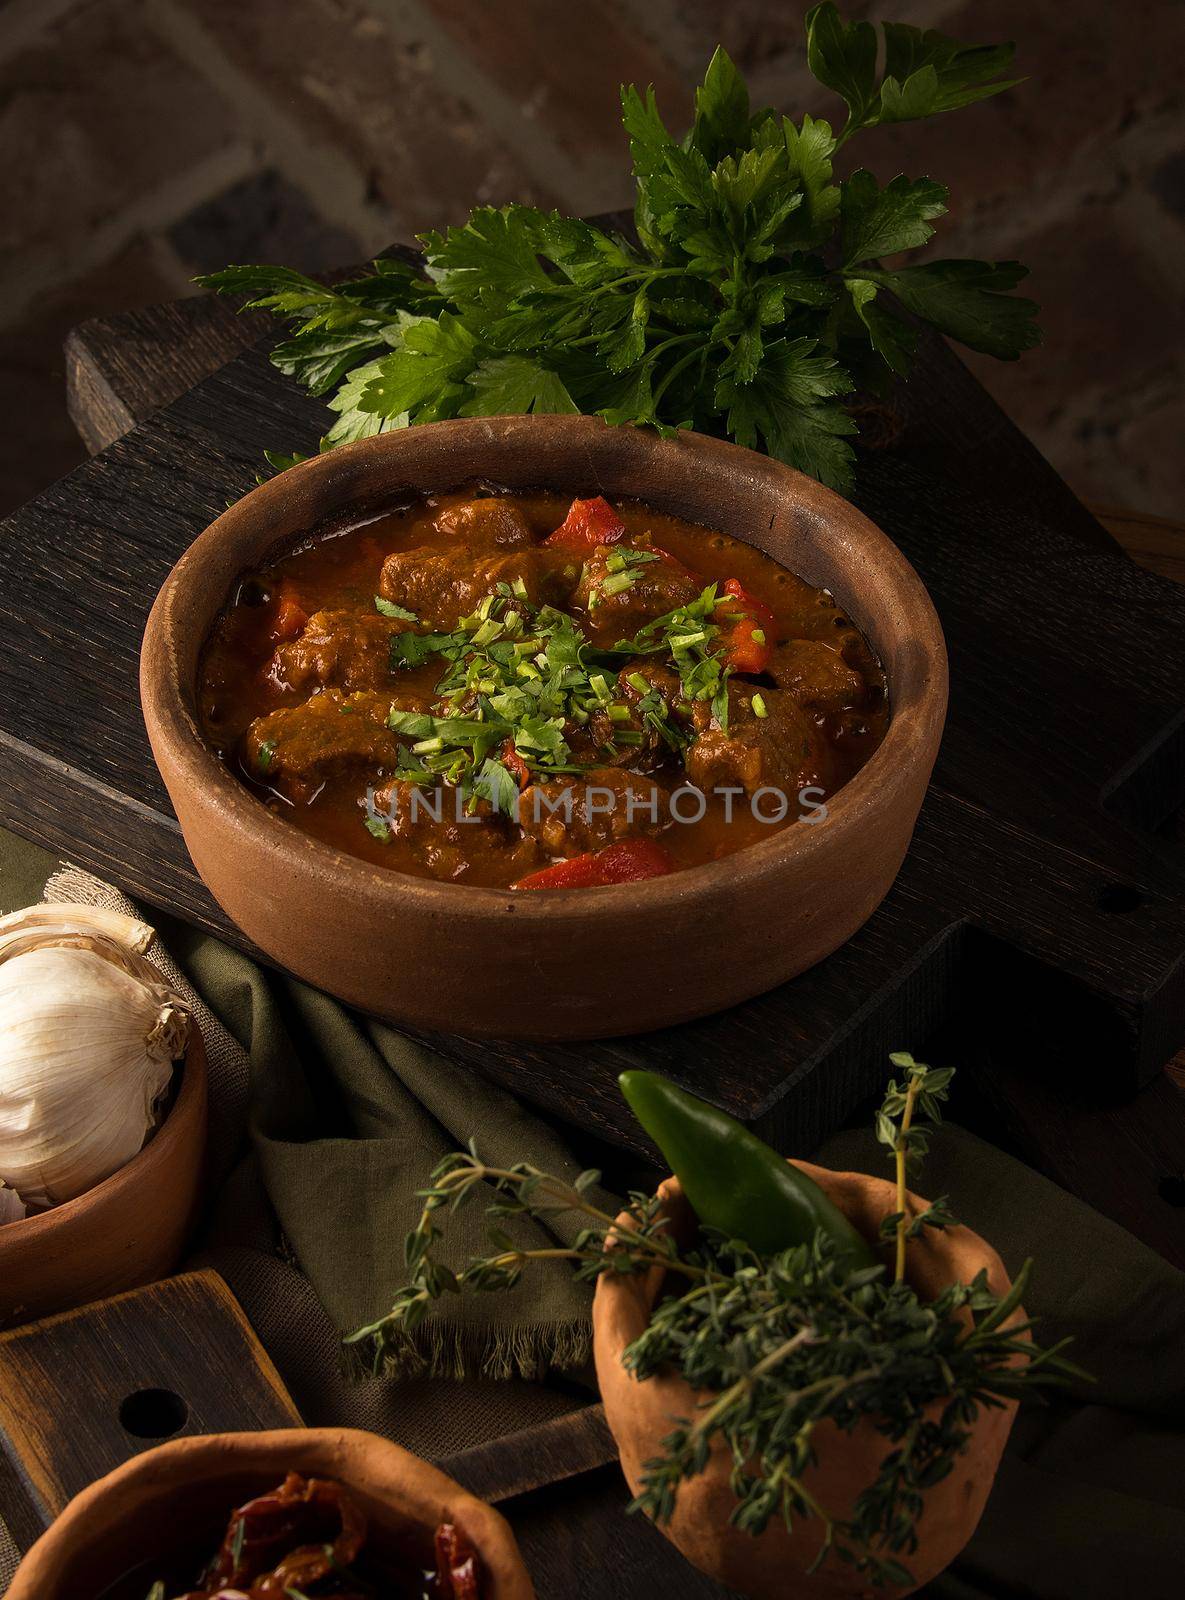 A close up shot of a meat stew and herbs in the background